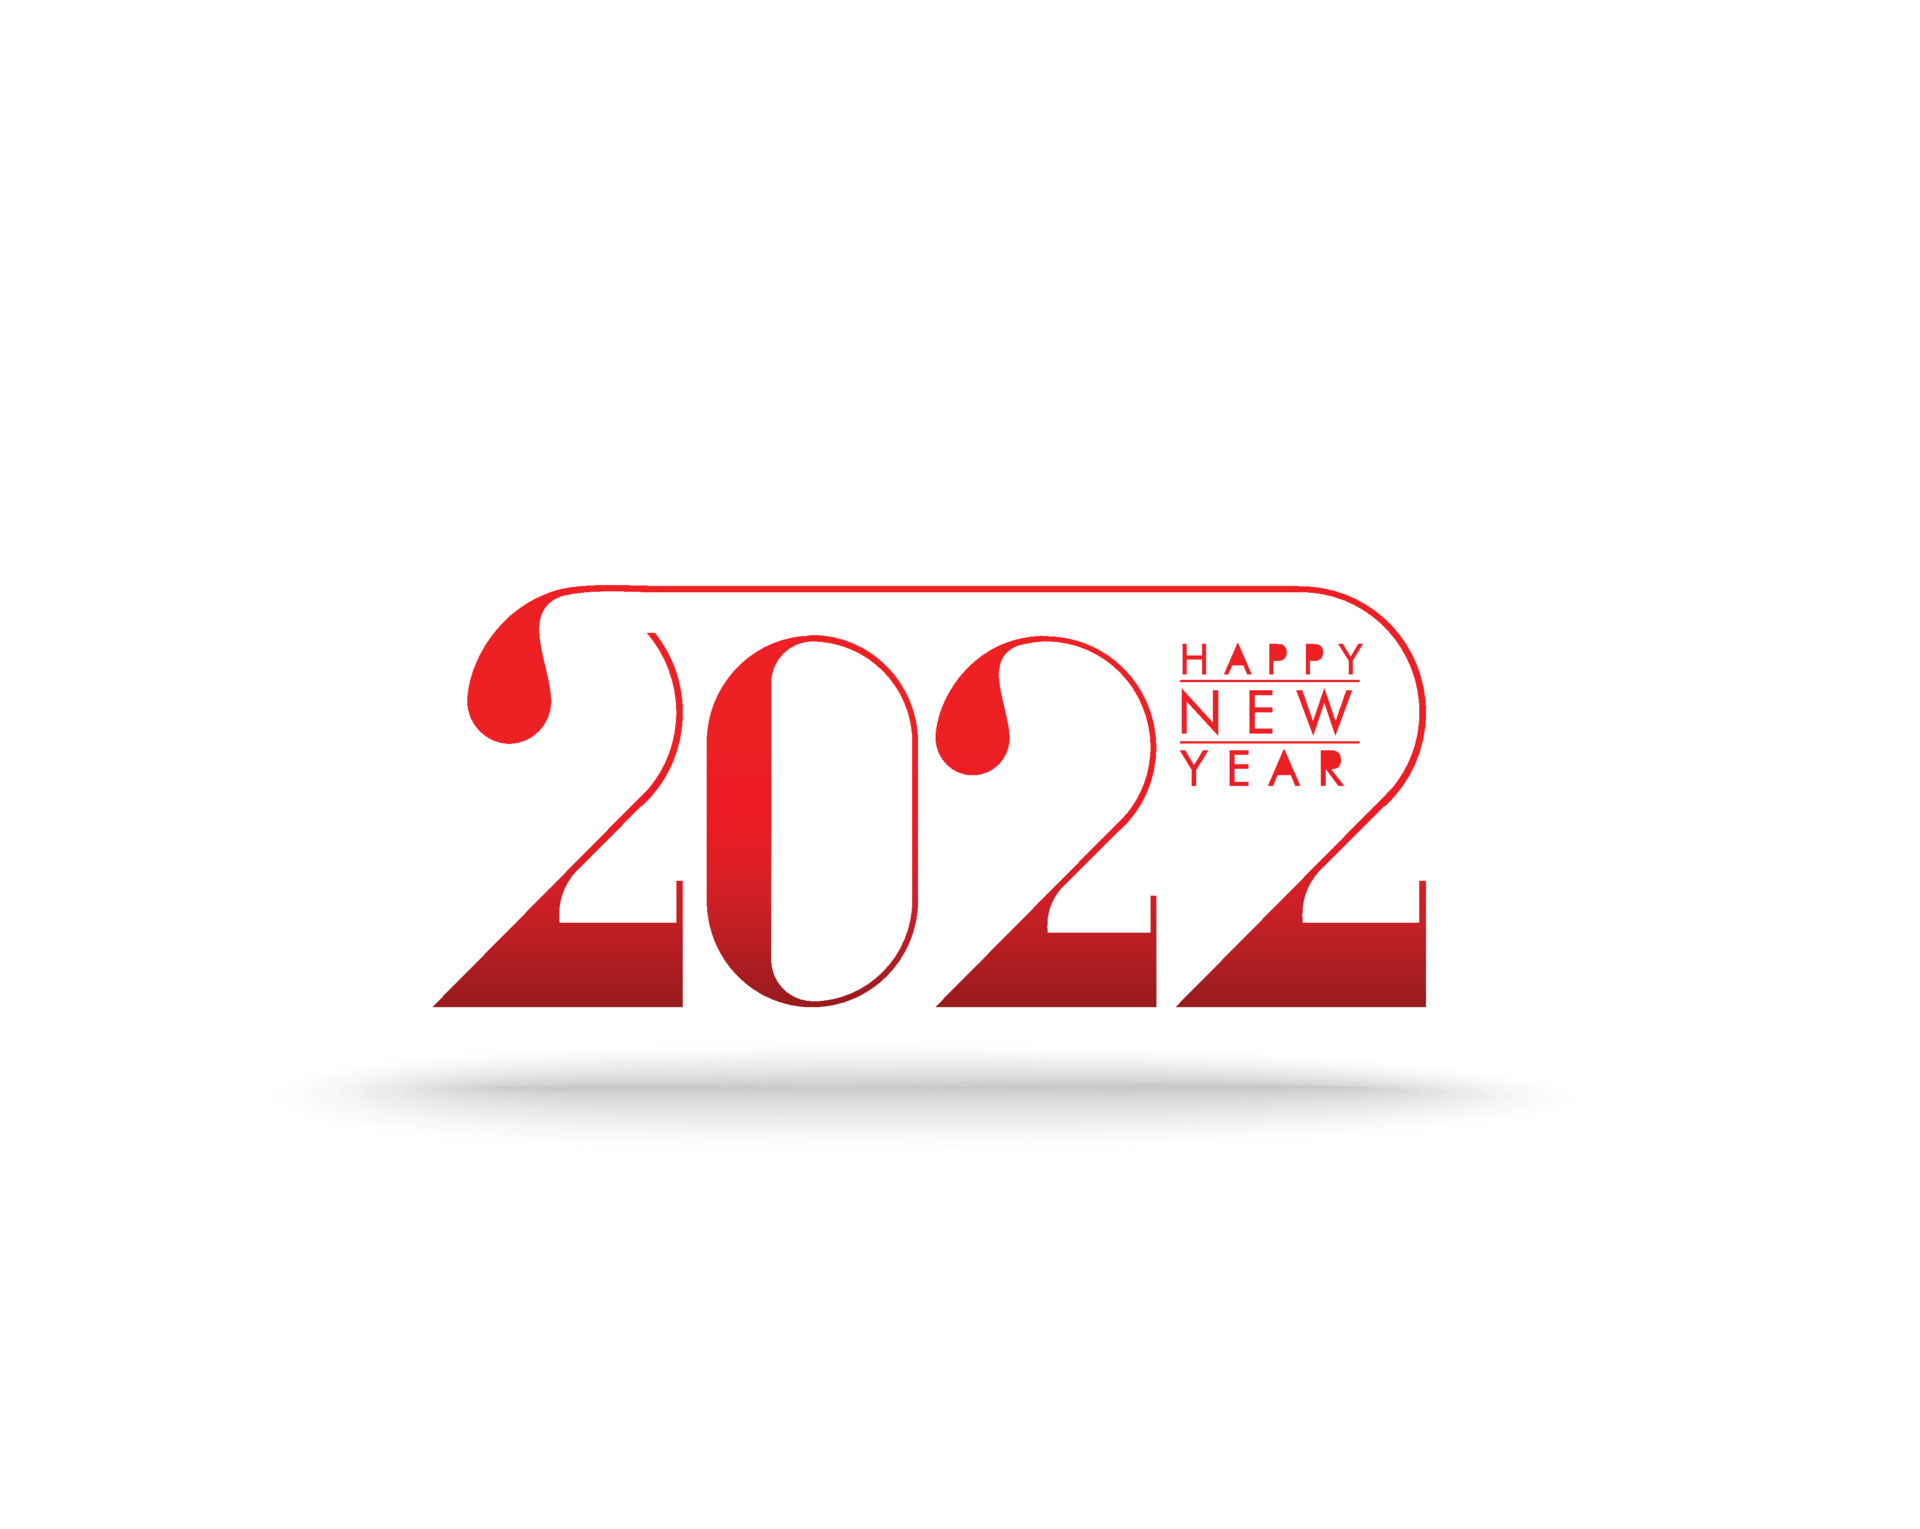 Happy New Year 2022 Text Typography Design Patter, Vector illustration ...